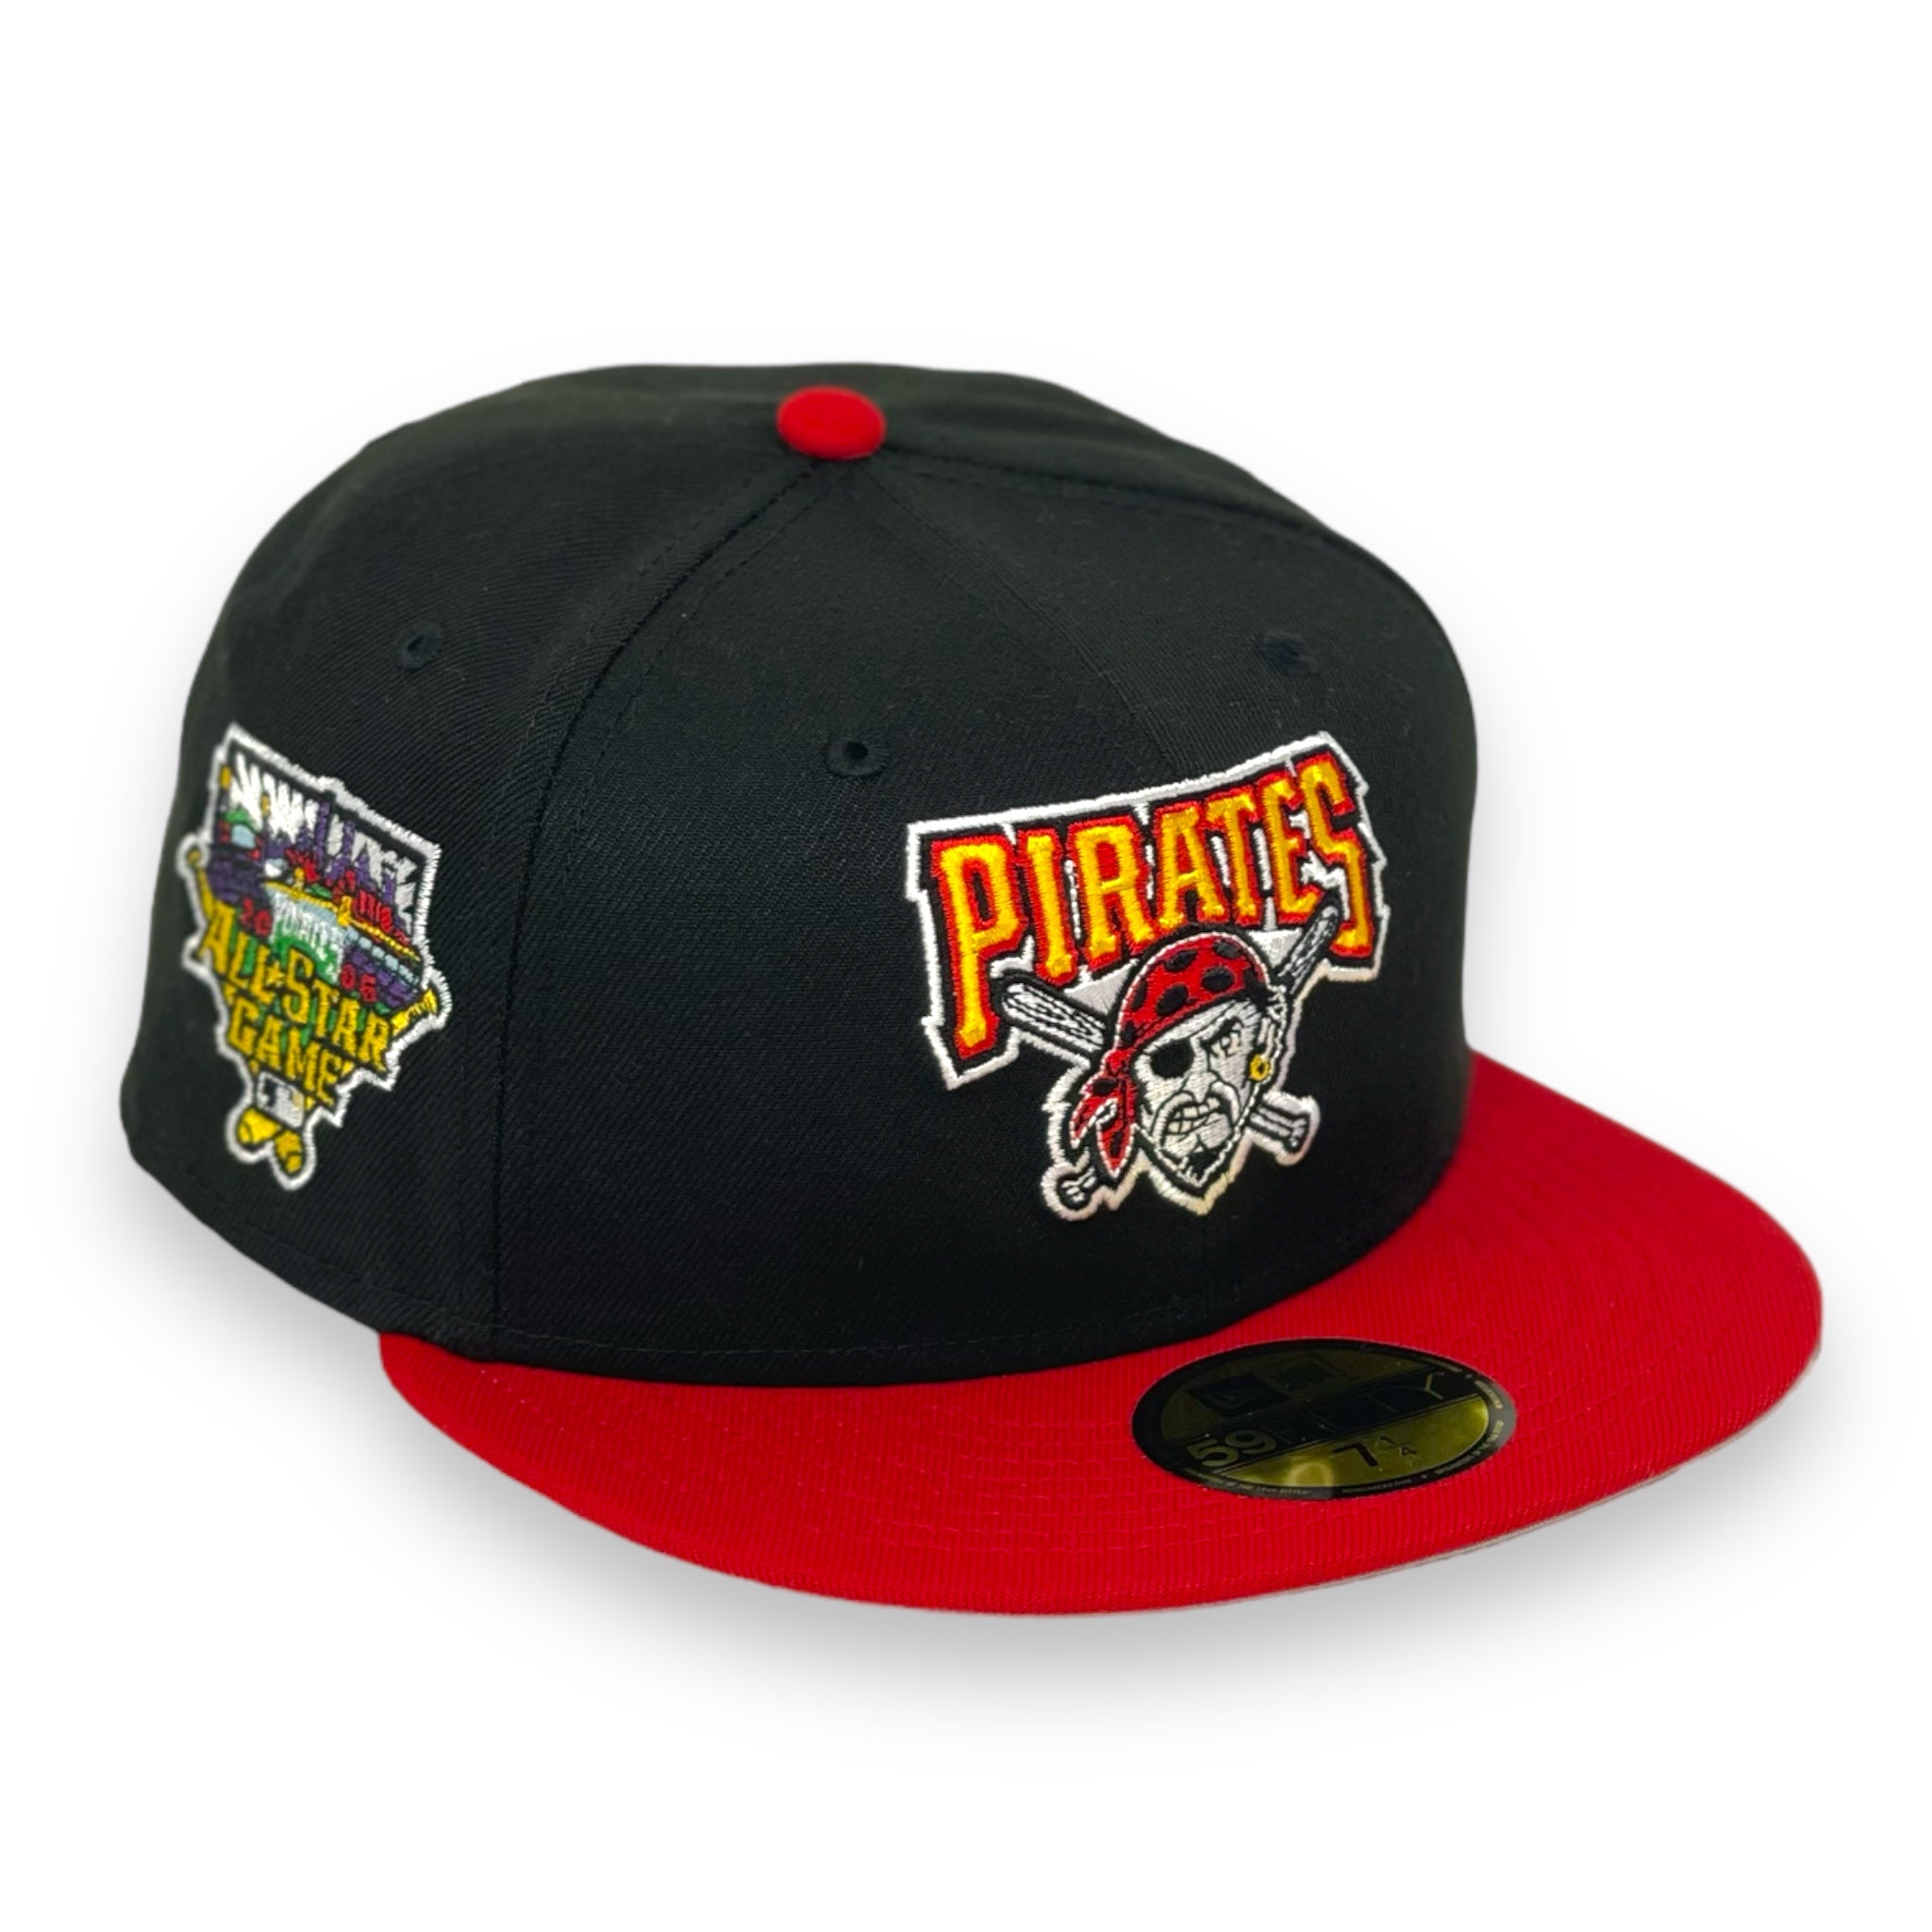 PITTSBURGH PIRATES (2006 ALLSTARGAME) NEW ERA 59FIFTY FITTED